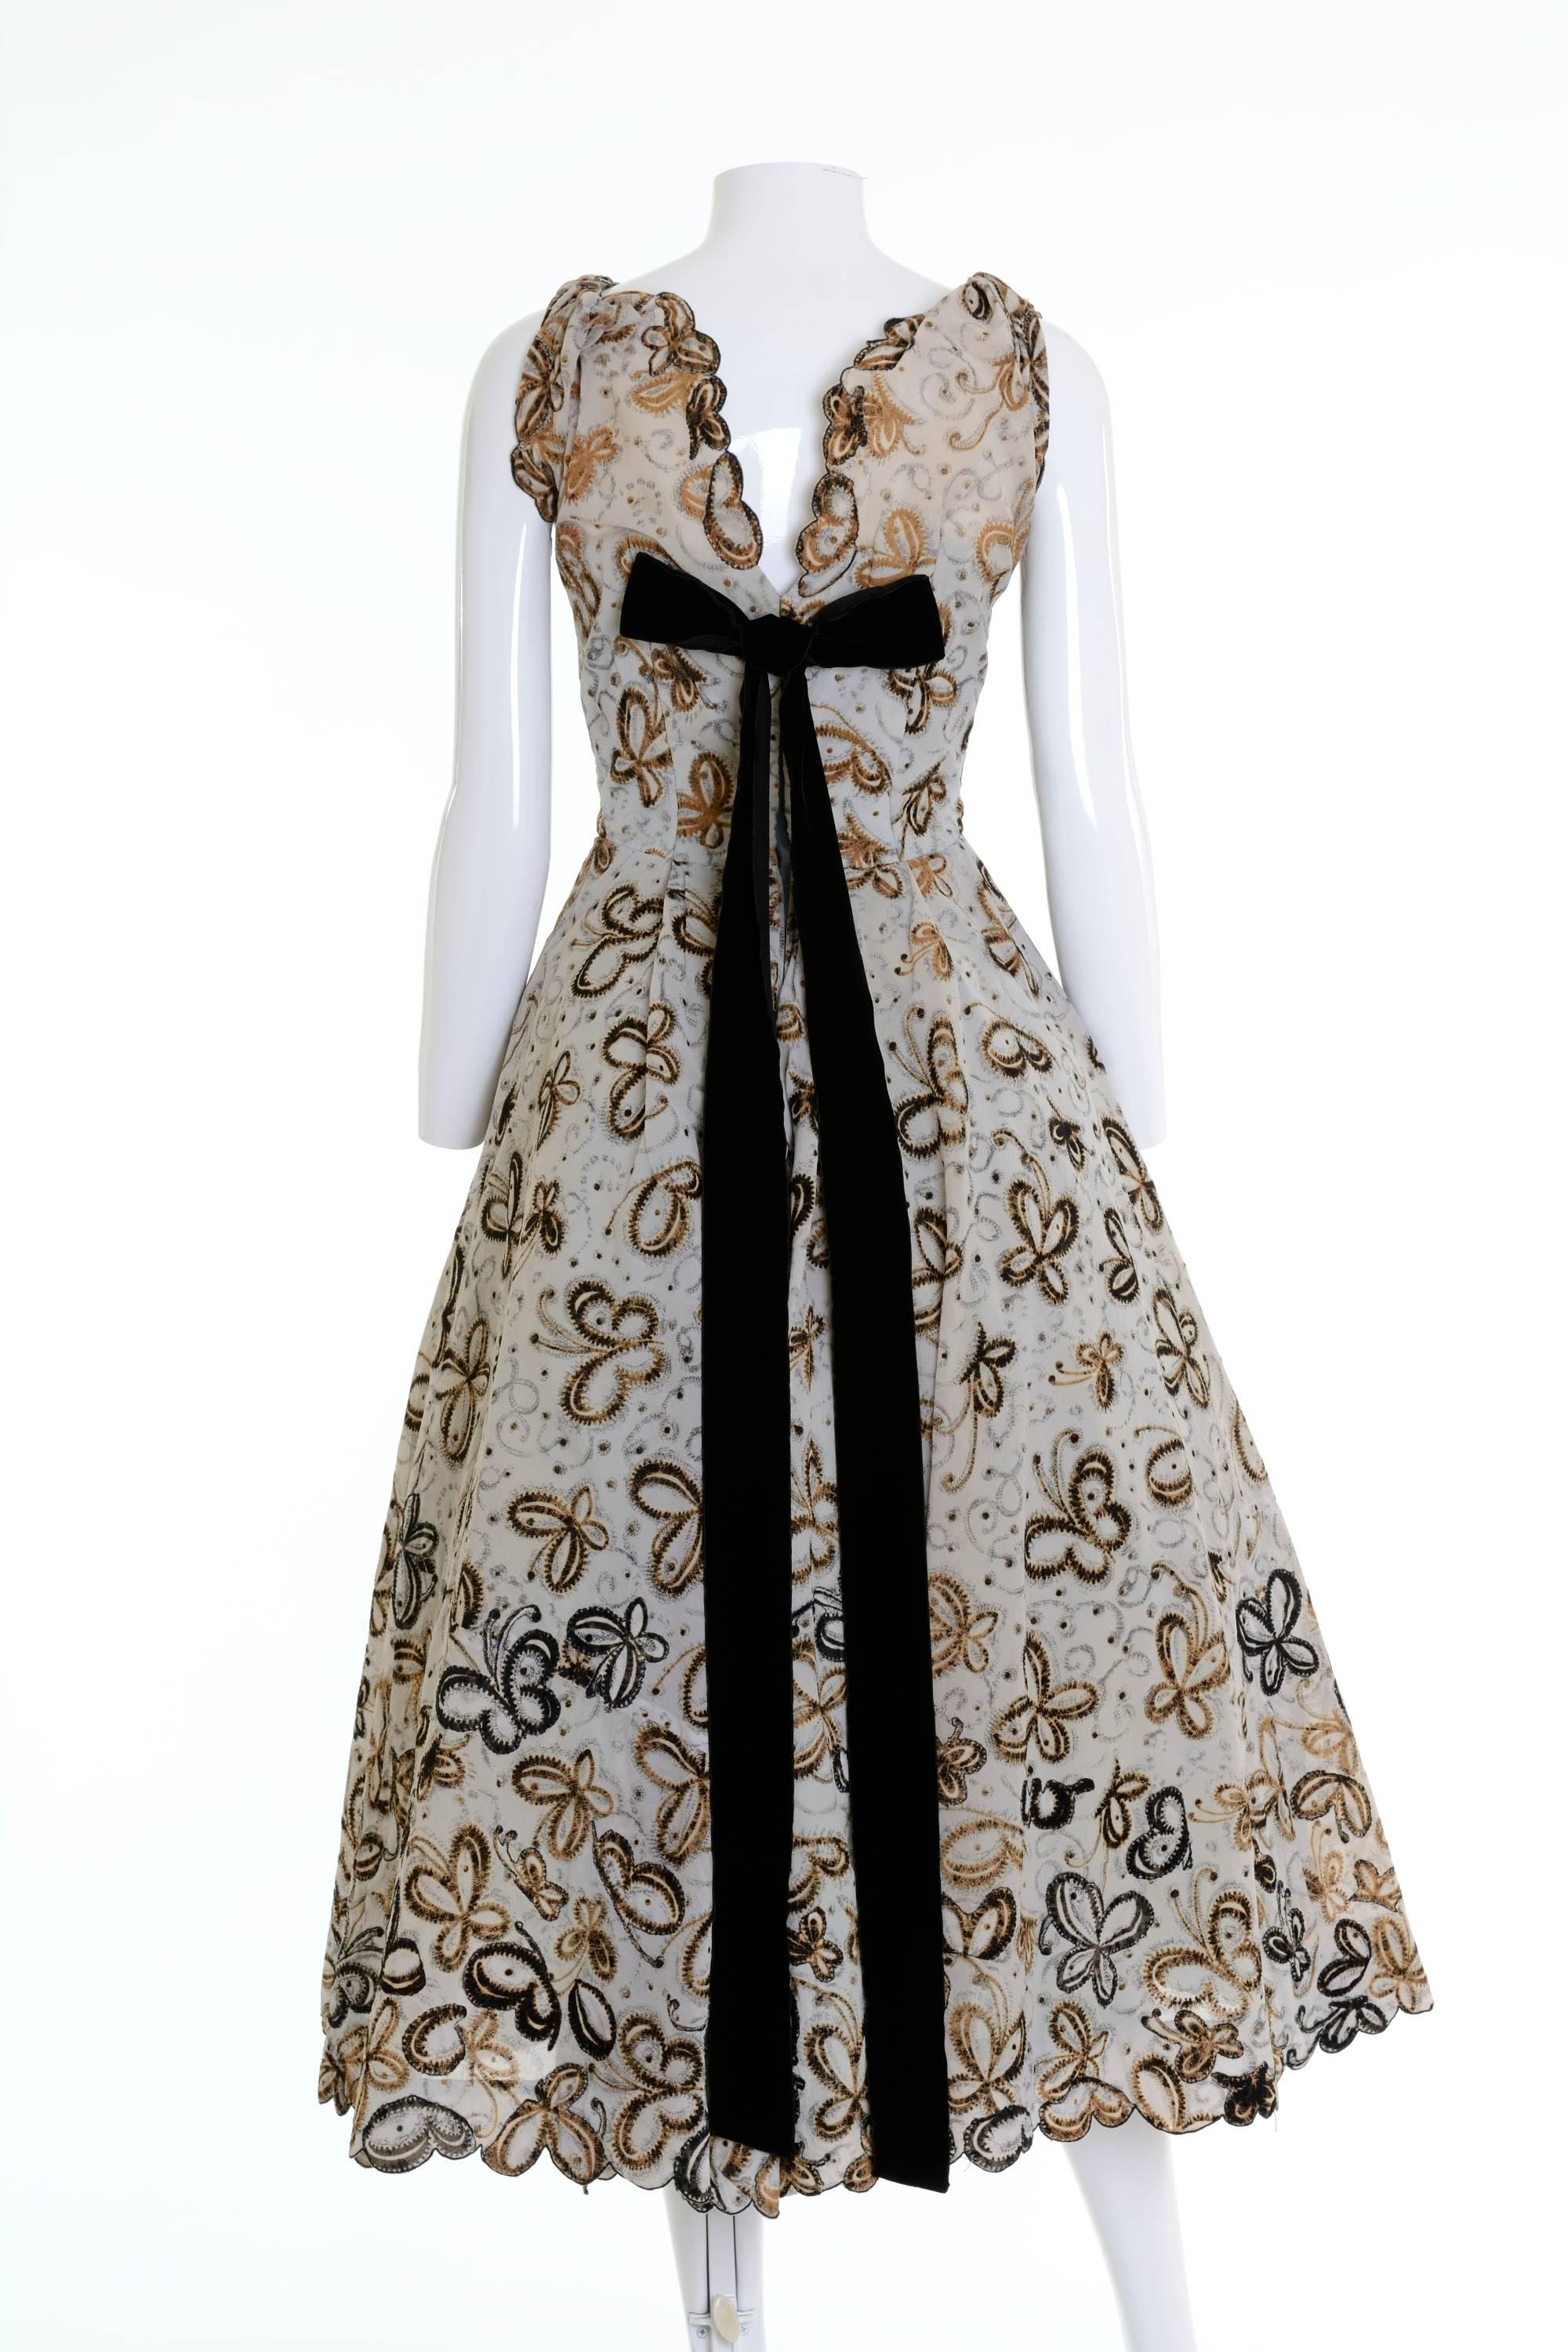 This gorgeous 1950s circle dress is in a powder gray and brown brocade butterfly print fabric. It has boning bodice, full circle skirt, velvet back bow ribbon and back zip closure.

Good vintage condition
 
Label: N/A
Fabric: acetate
Color: powder